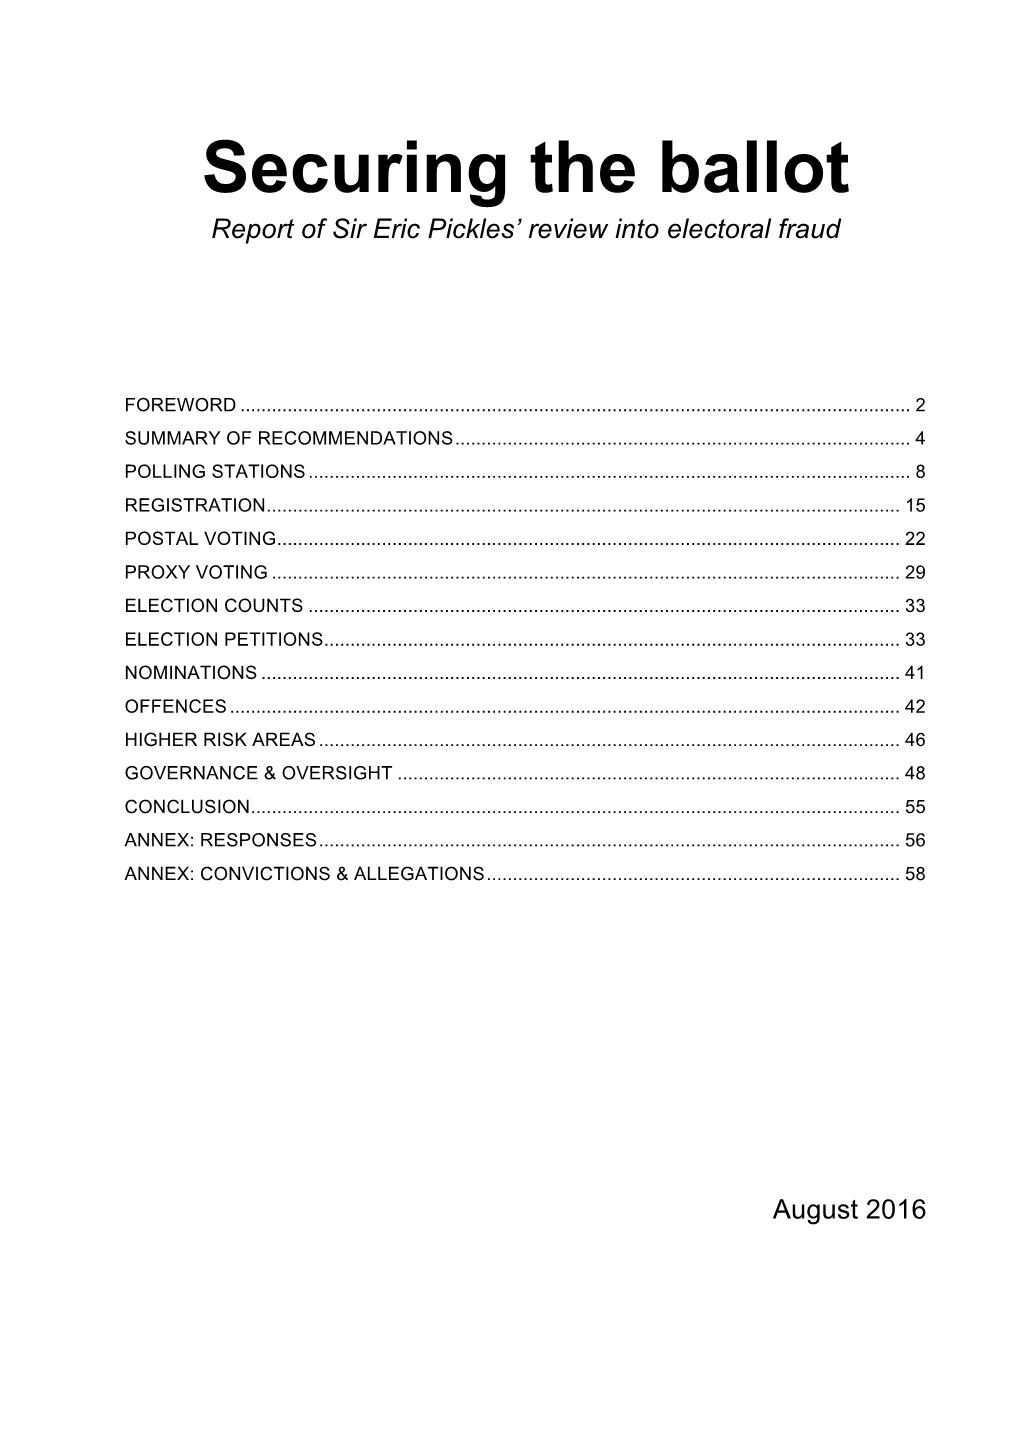 Securing the Ballot Report of Sir Eric Pickles' Review Into Electoral Fraud